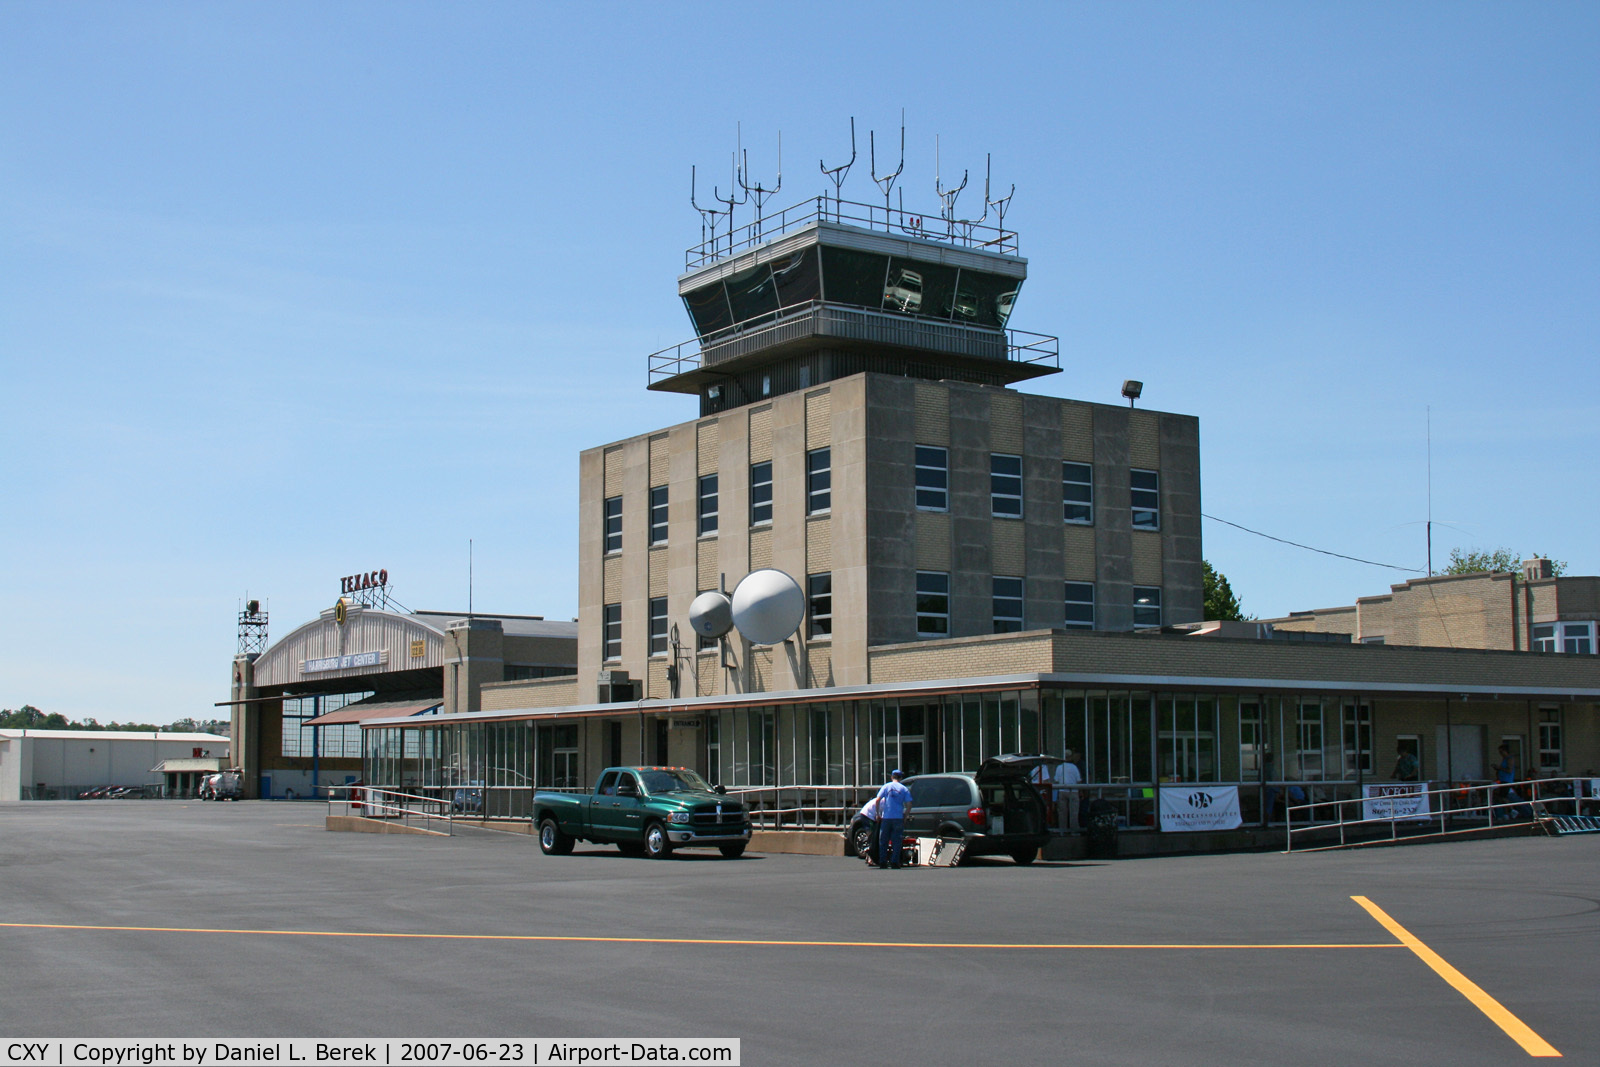 Capital City Airport (CXY) - This old terminal and hangar are the main buildings at Capital City Airport.